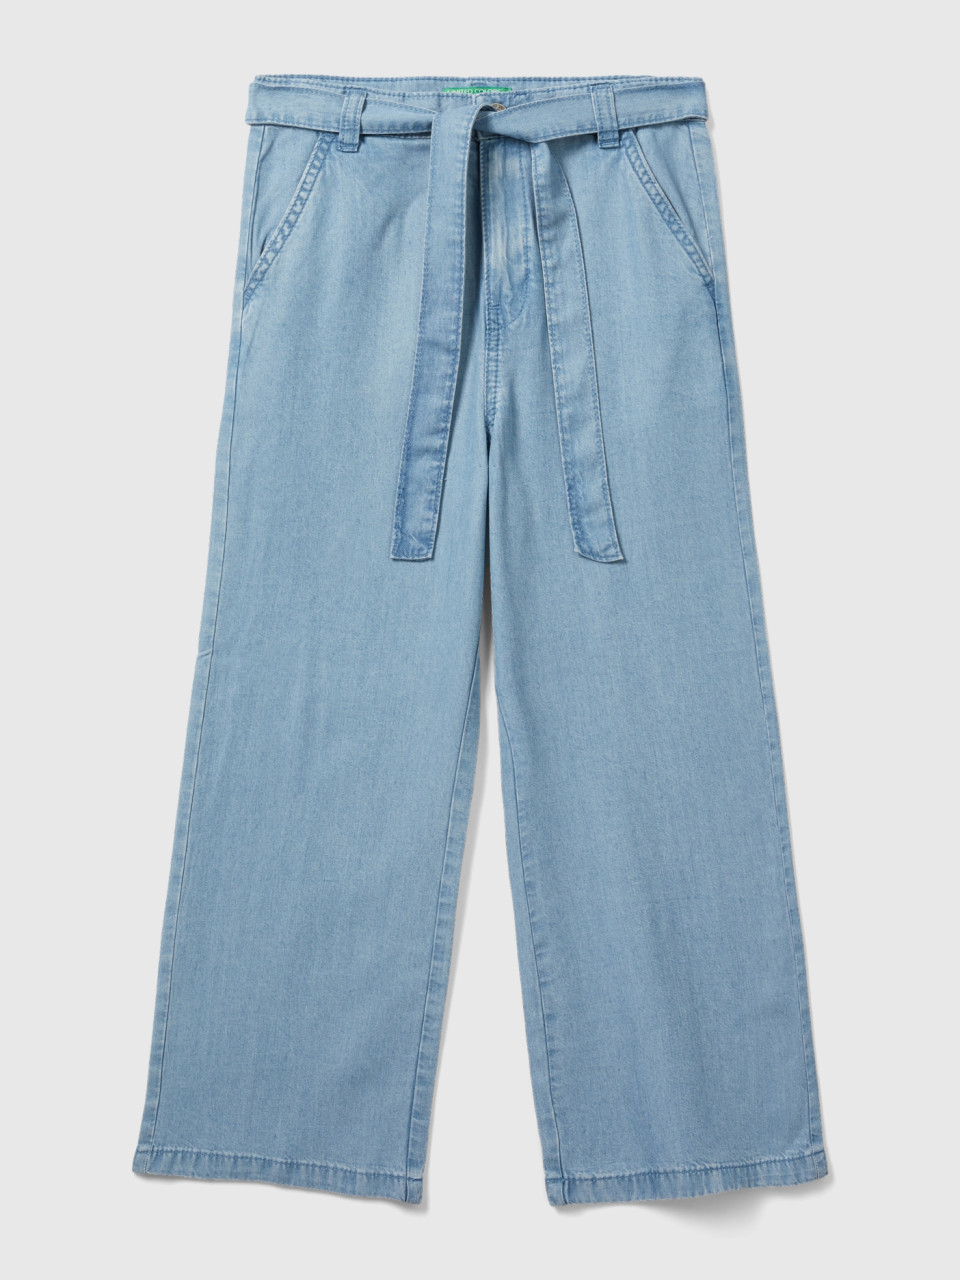 Benetton, Wide Fit Trousers In Chambray, Sky Blue, Kids